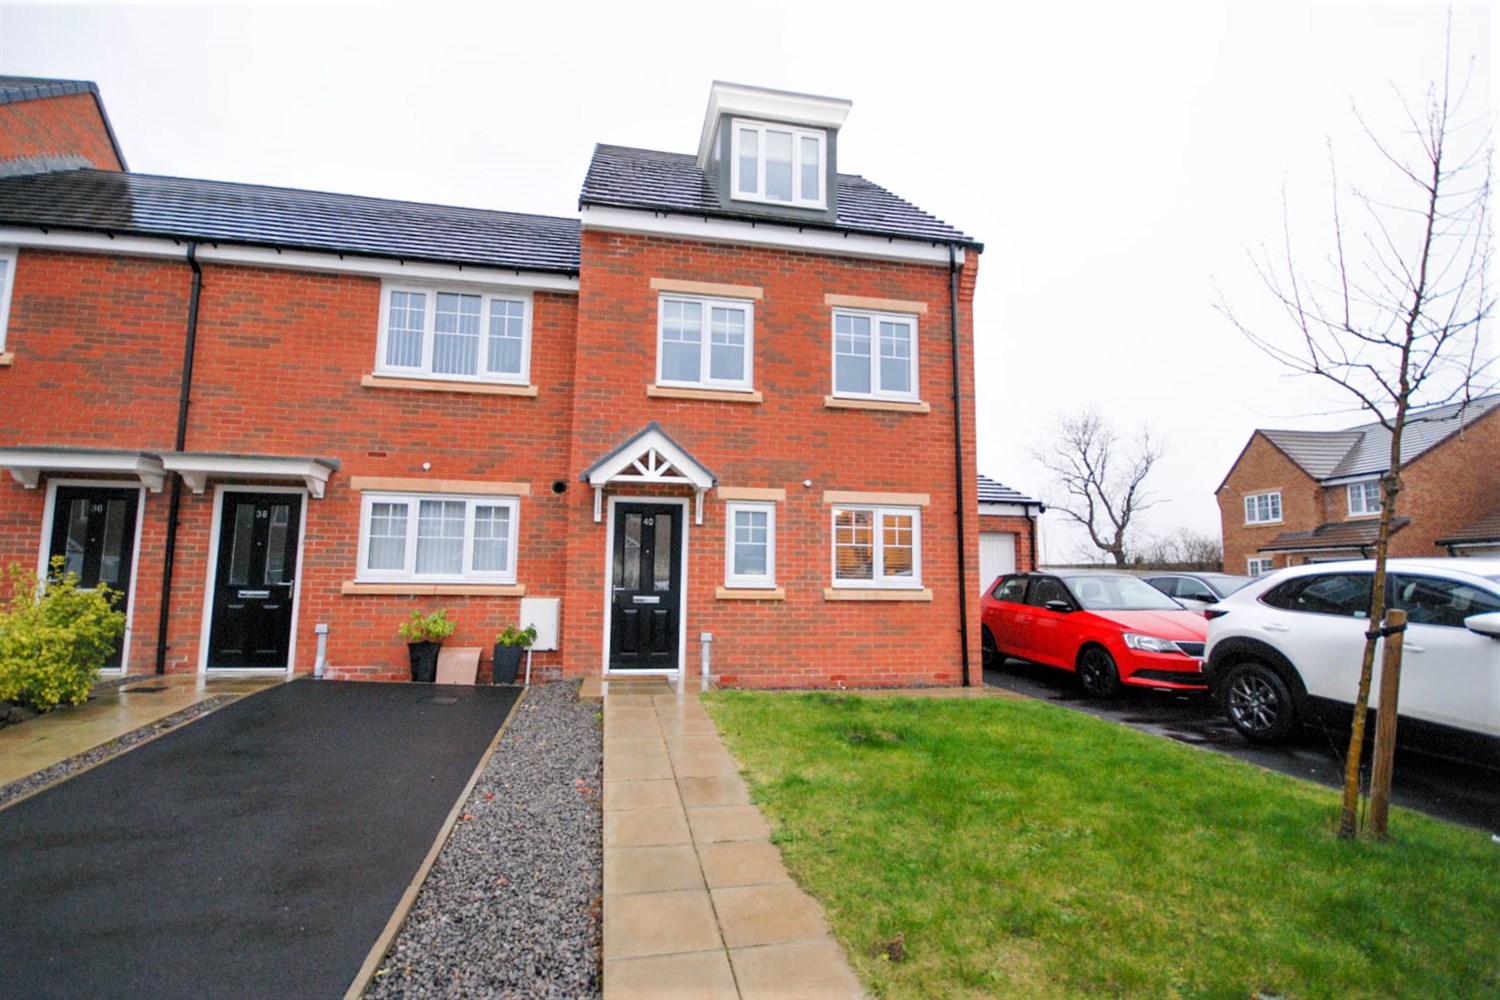 3 bed end of terraced town house for sale in Hutchinson Court, Newcastle Upon Tyne  - Property Image 1